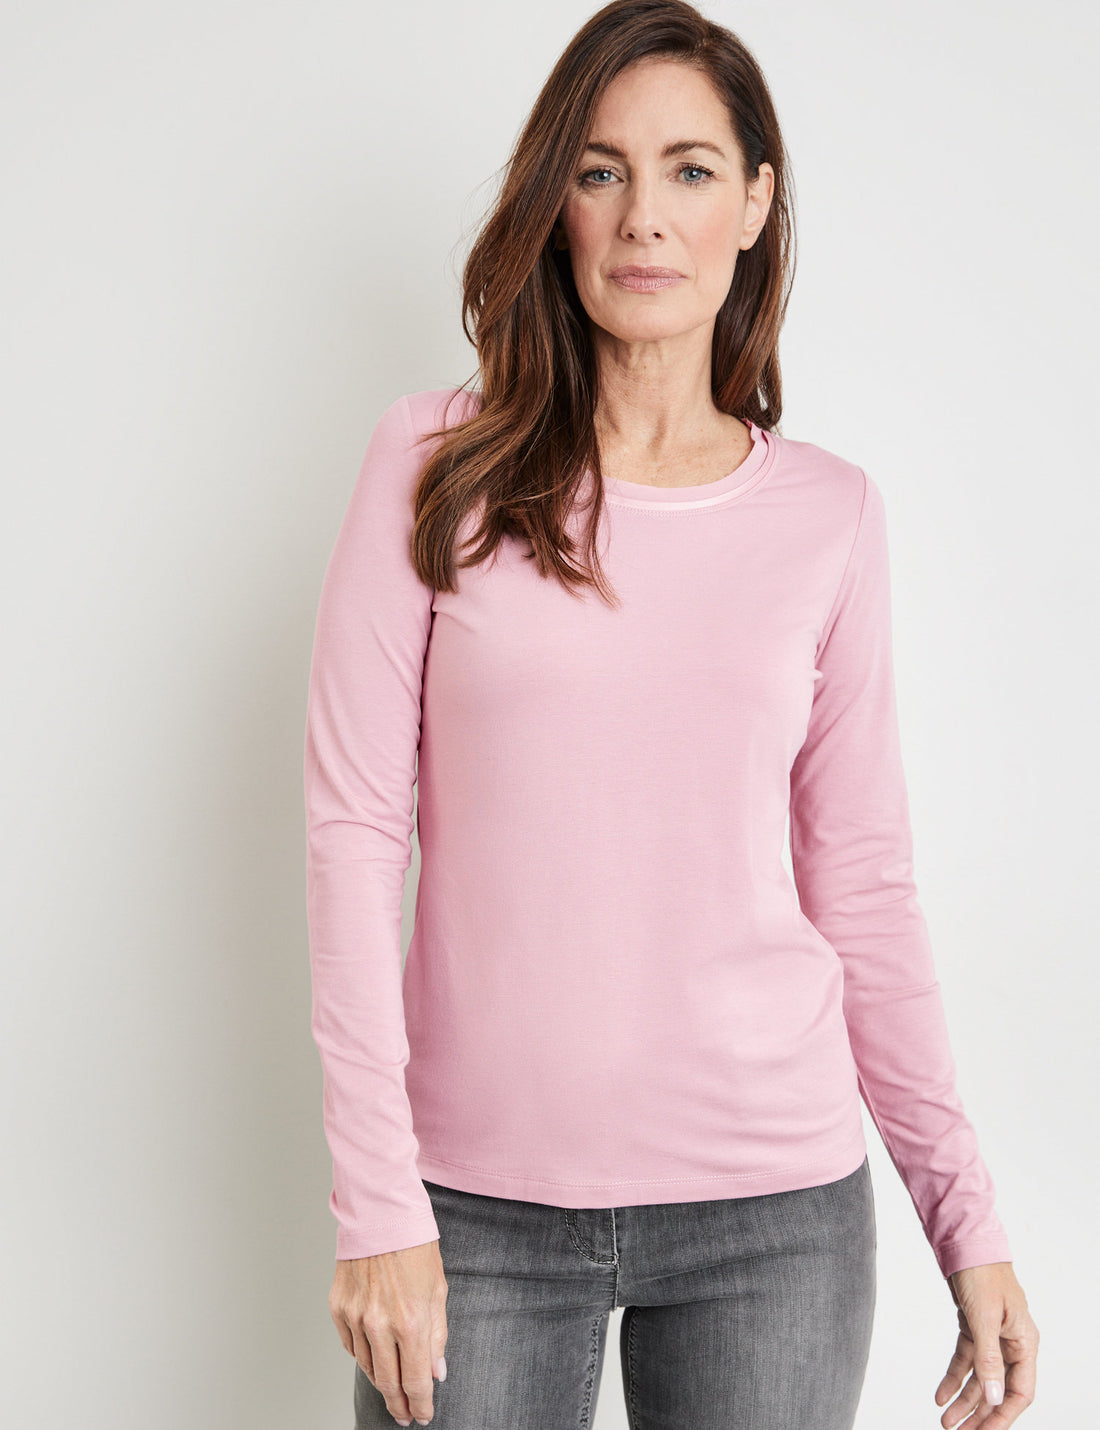 Long Sleeve Top With A Sheer Neckline Trim_370294-35060_30916_01